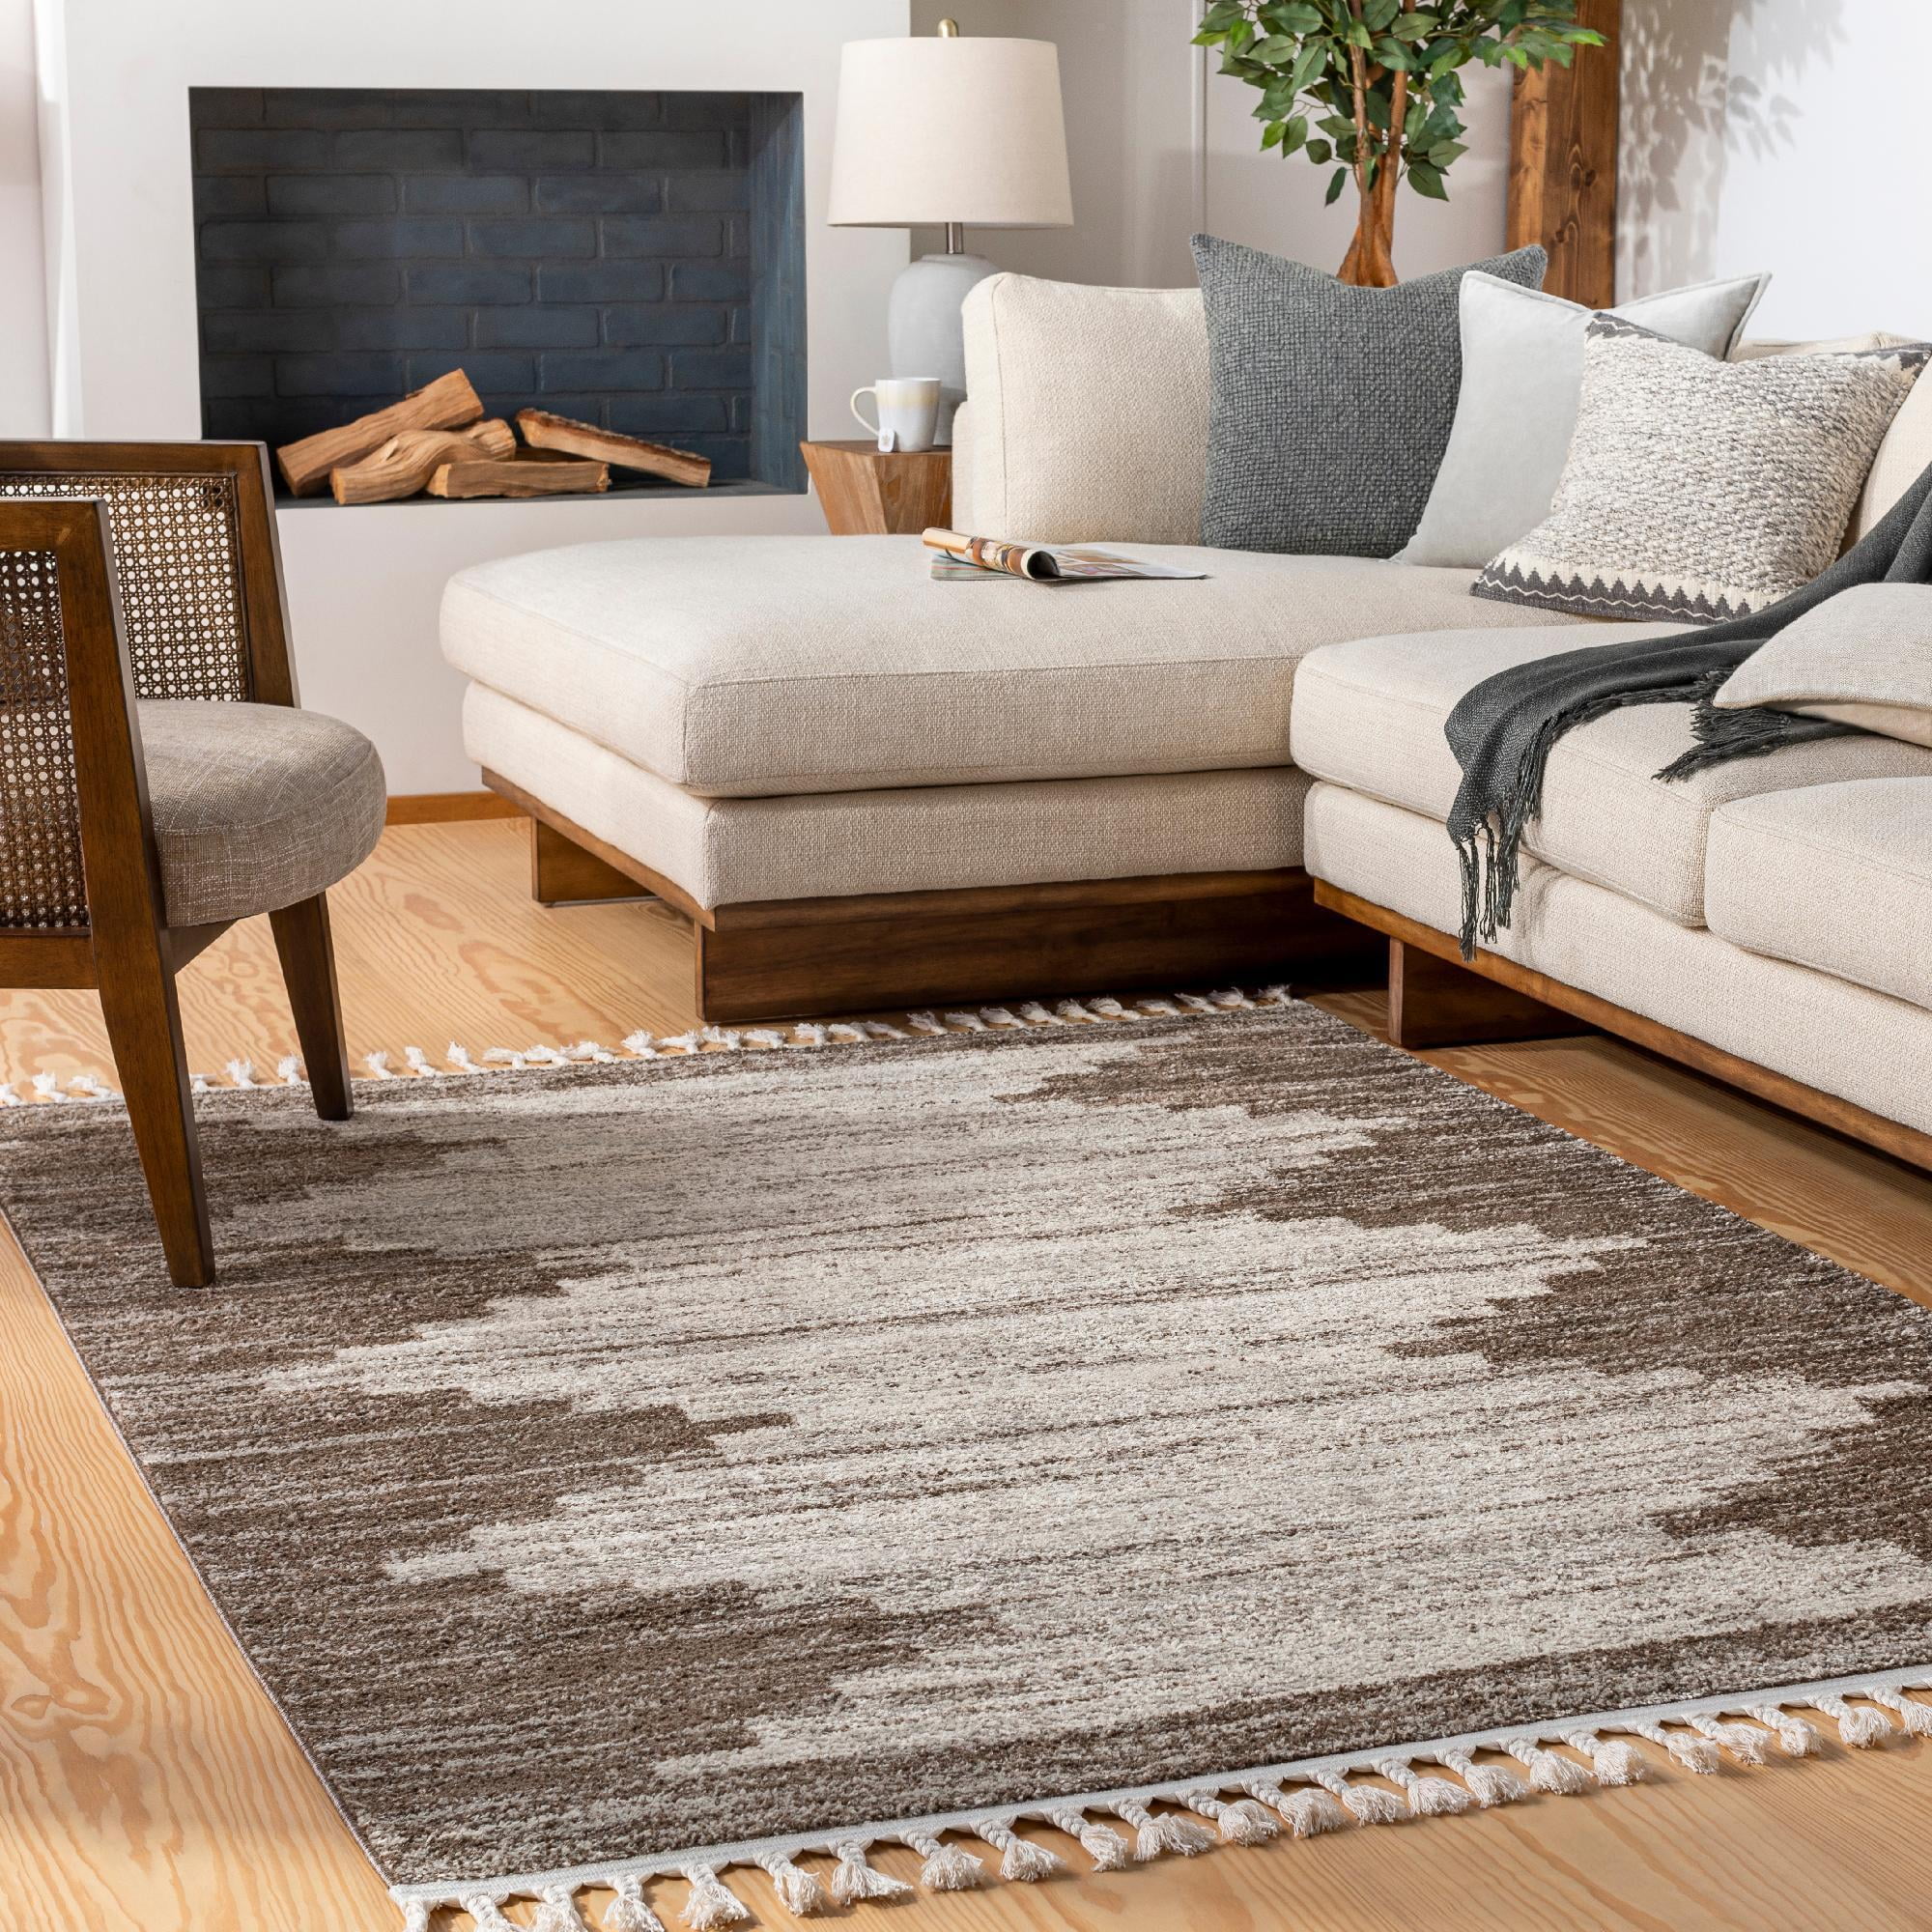 Mark&Day Area Rugs, 9x12 Ringsted Cream Area Rug x 12') - Walmart.com